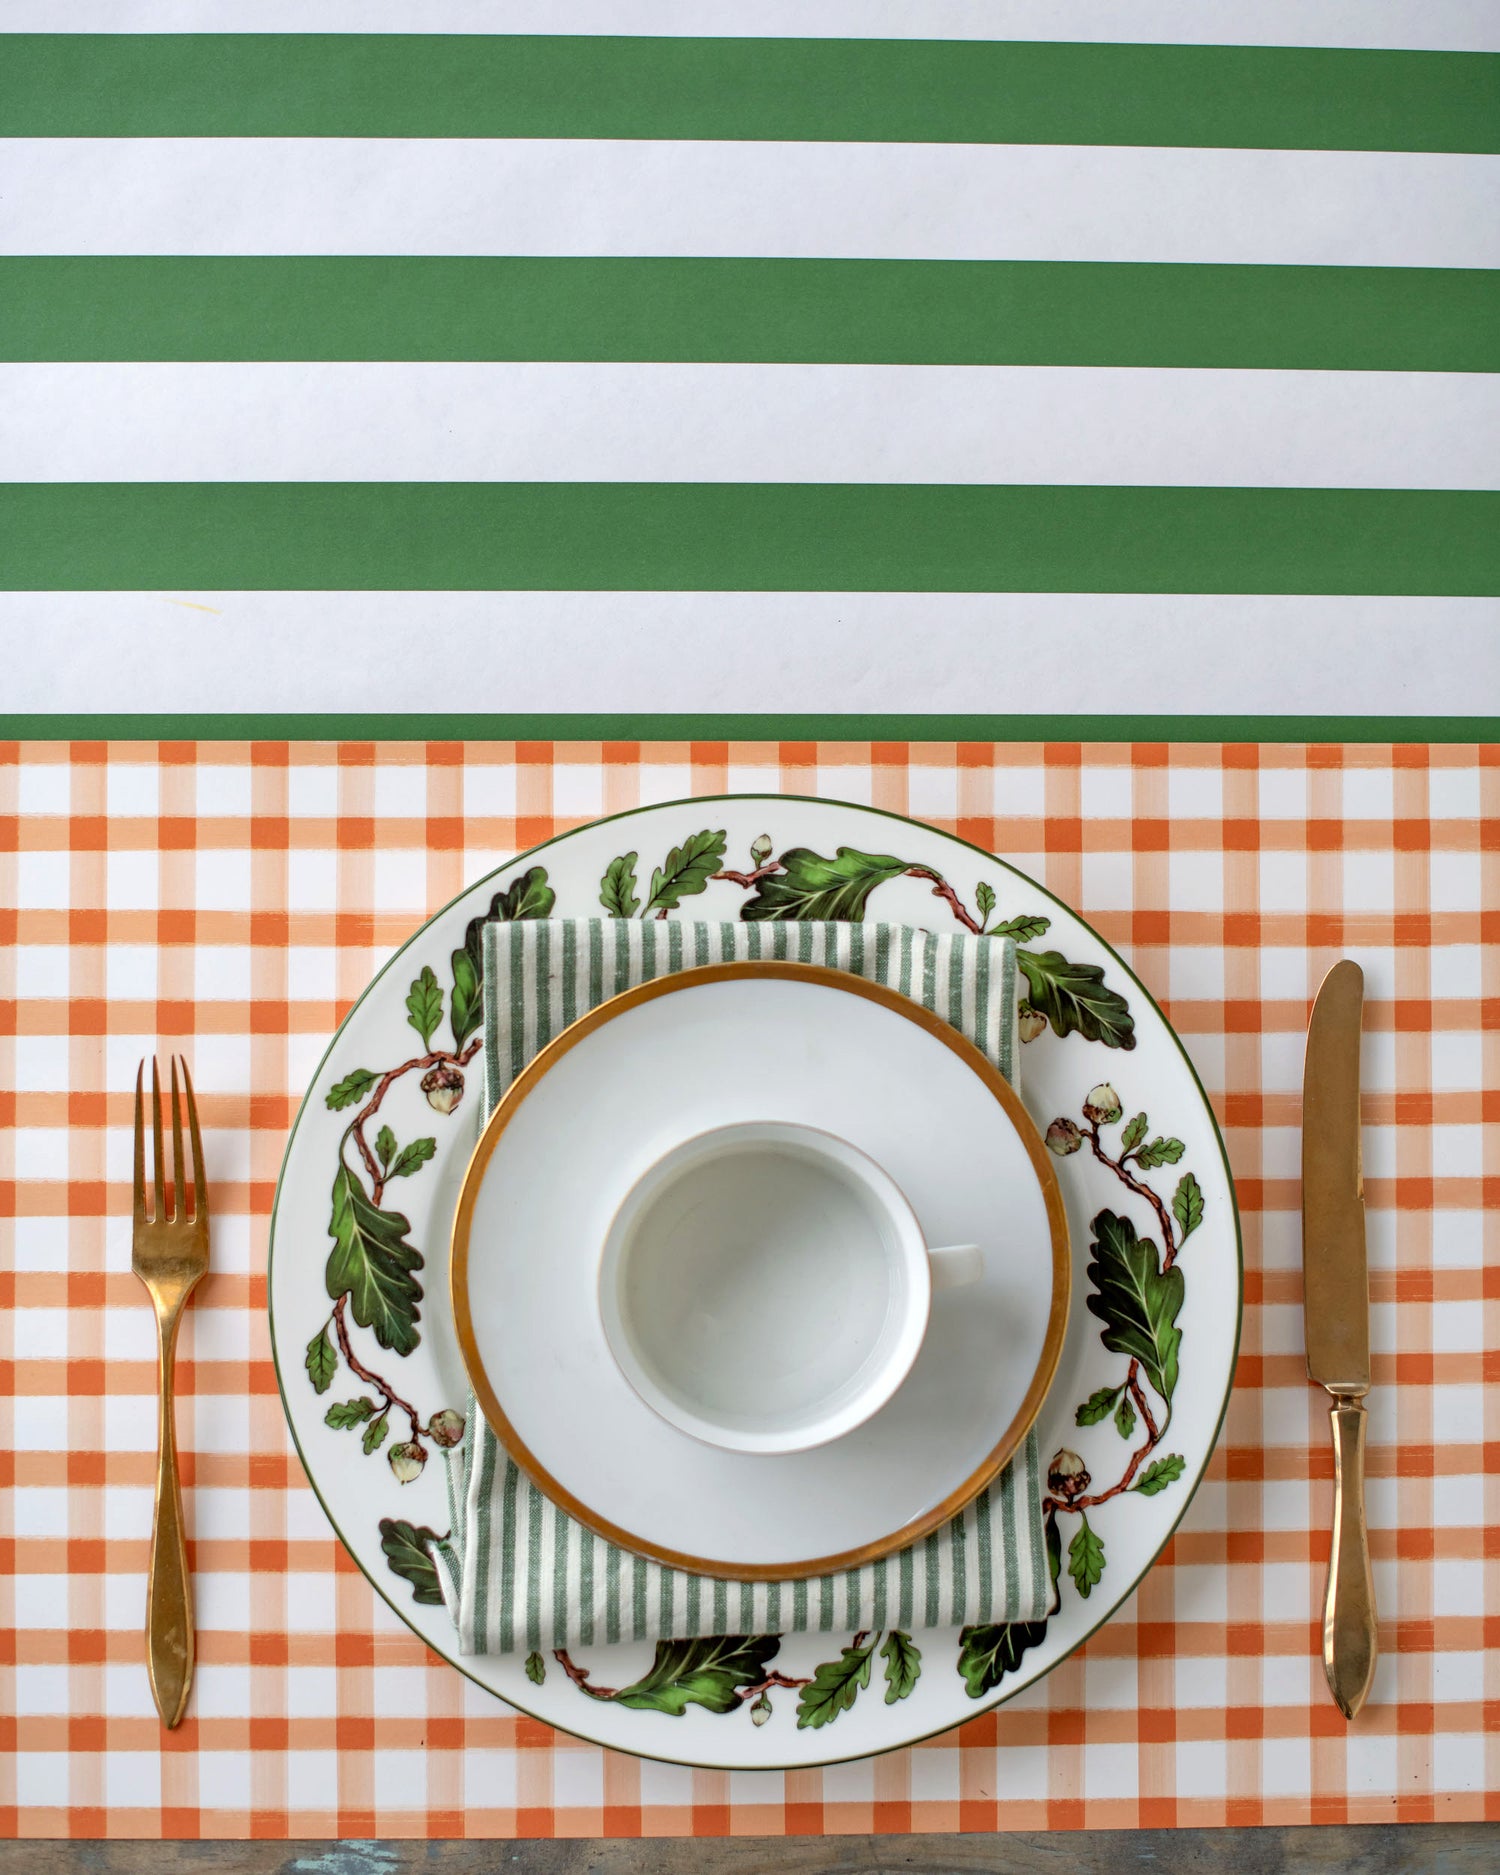 A vibrant Hester &amp; Cook Dark Green Classic Stripe Runner place setting, perfect for entertaining. Complete with a knife and fork, this set is the ideal choice for any host or hostess looking to elevate their table with a